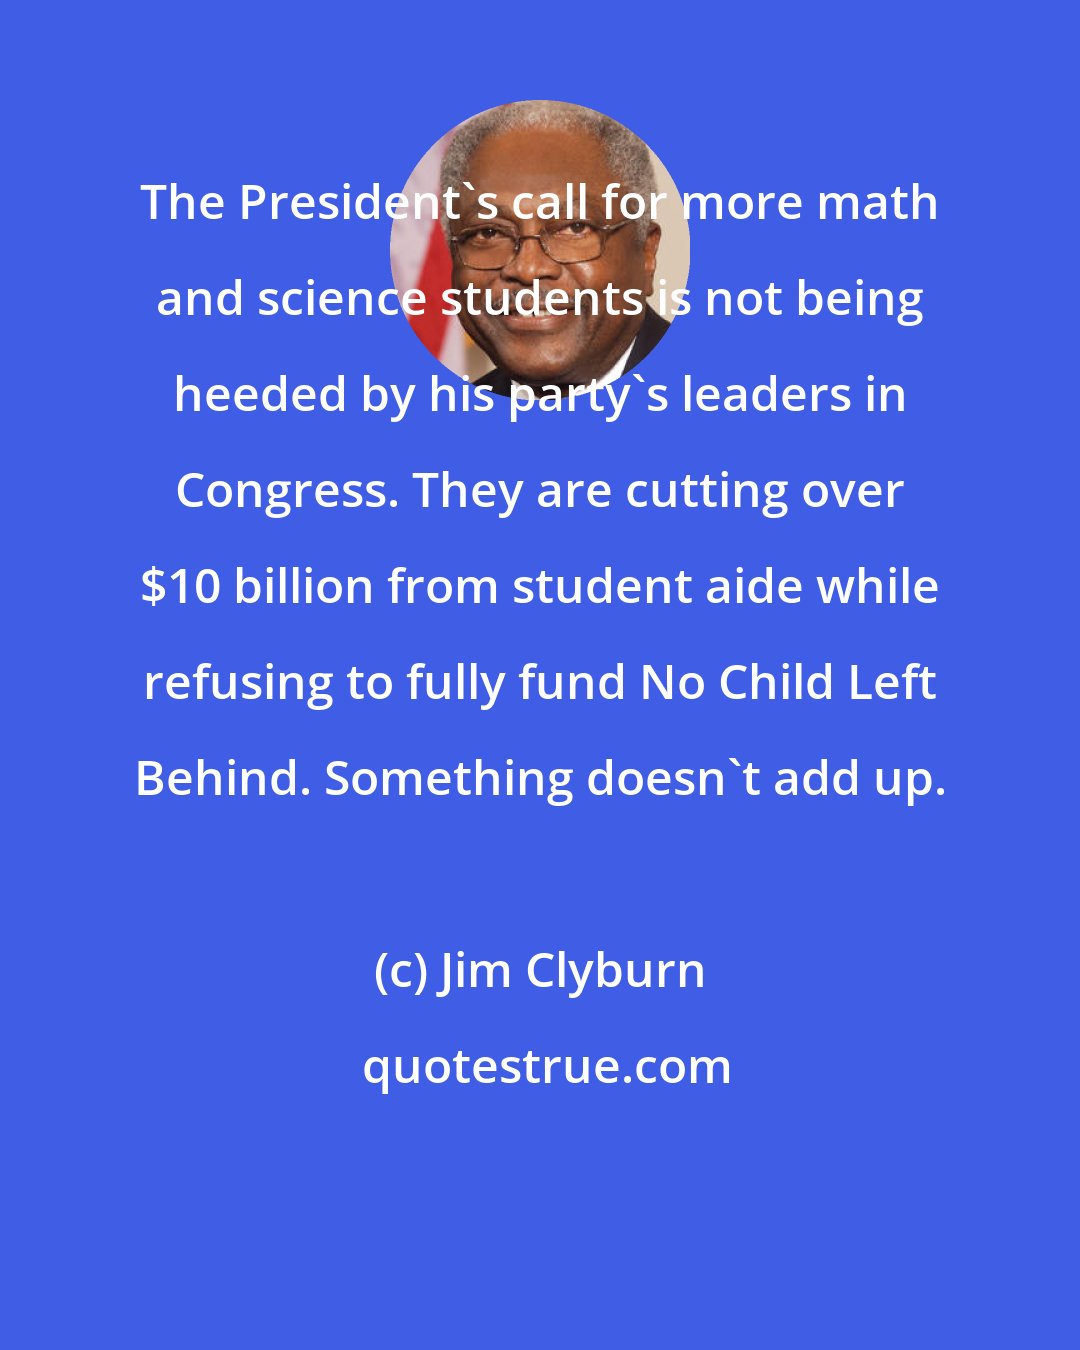 Jim Clyburn: The President's call for more math and science students is not being heeded by his party's leaders in Congress. They are cutting over $10 billion from student aide while refusing to fully fund No Child Left Behind. Something doesn't add up.